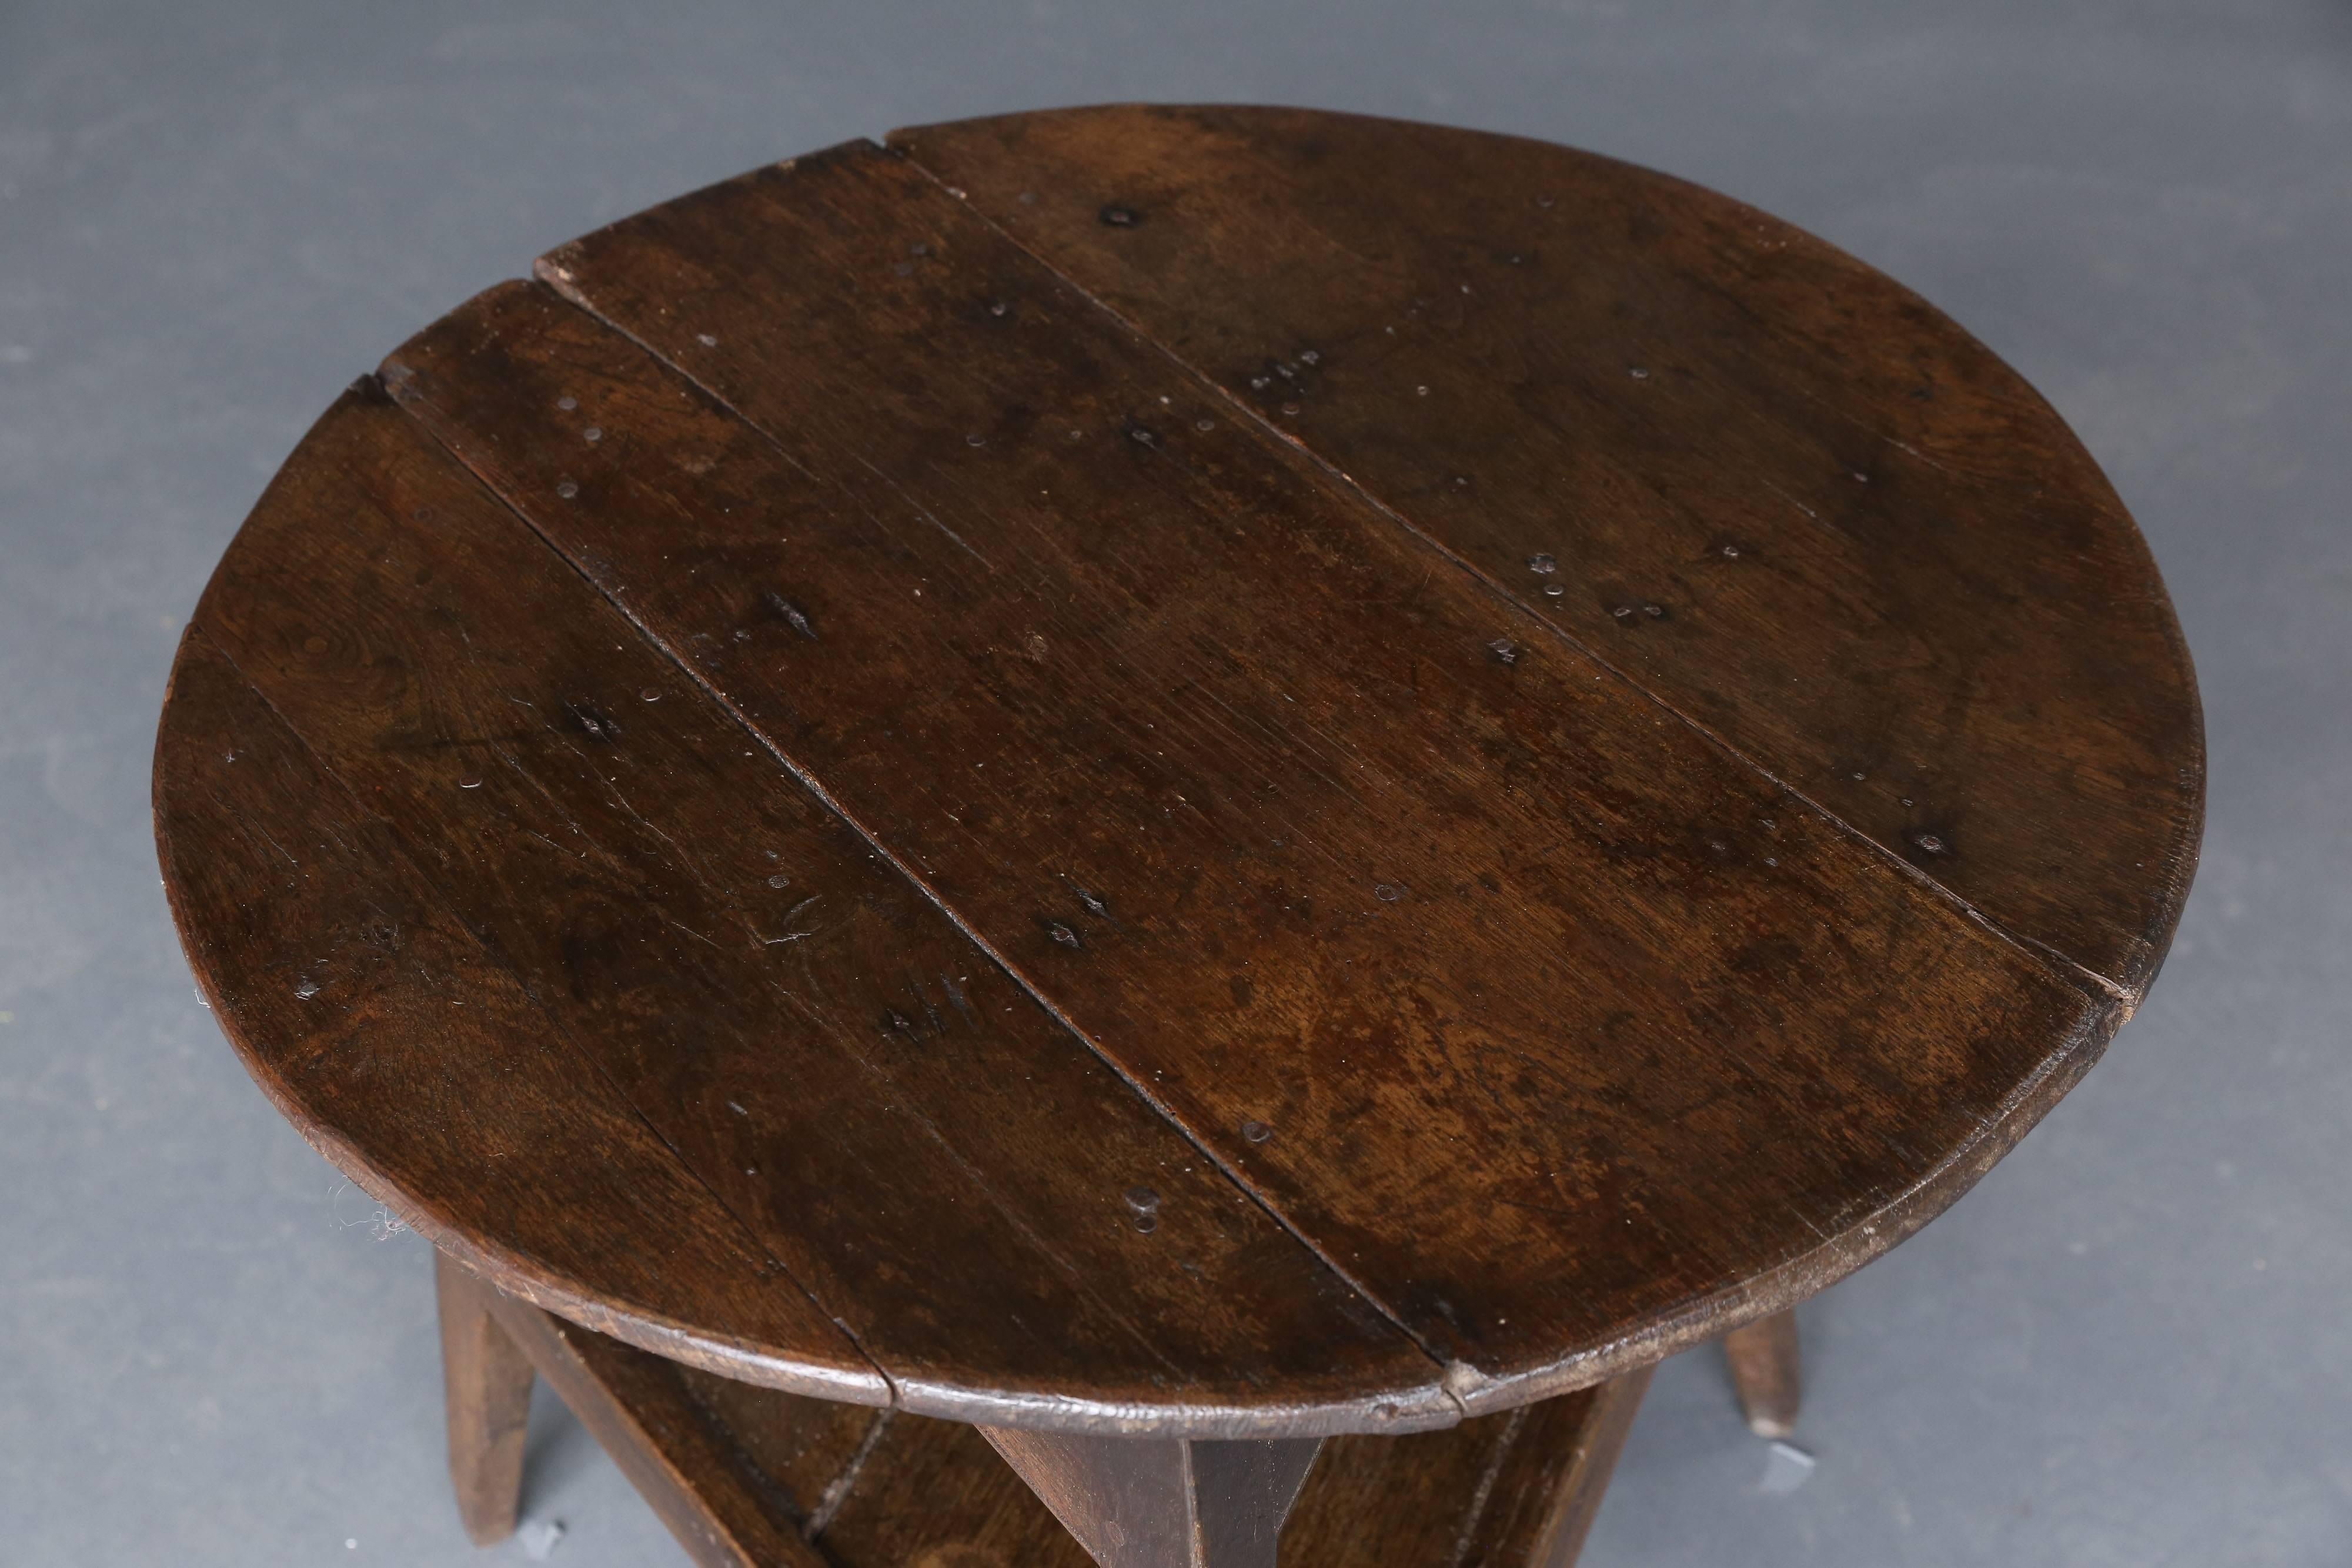 19th century oak cricket table with metal hand-wrought nails throughout top. Shelf underneath.